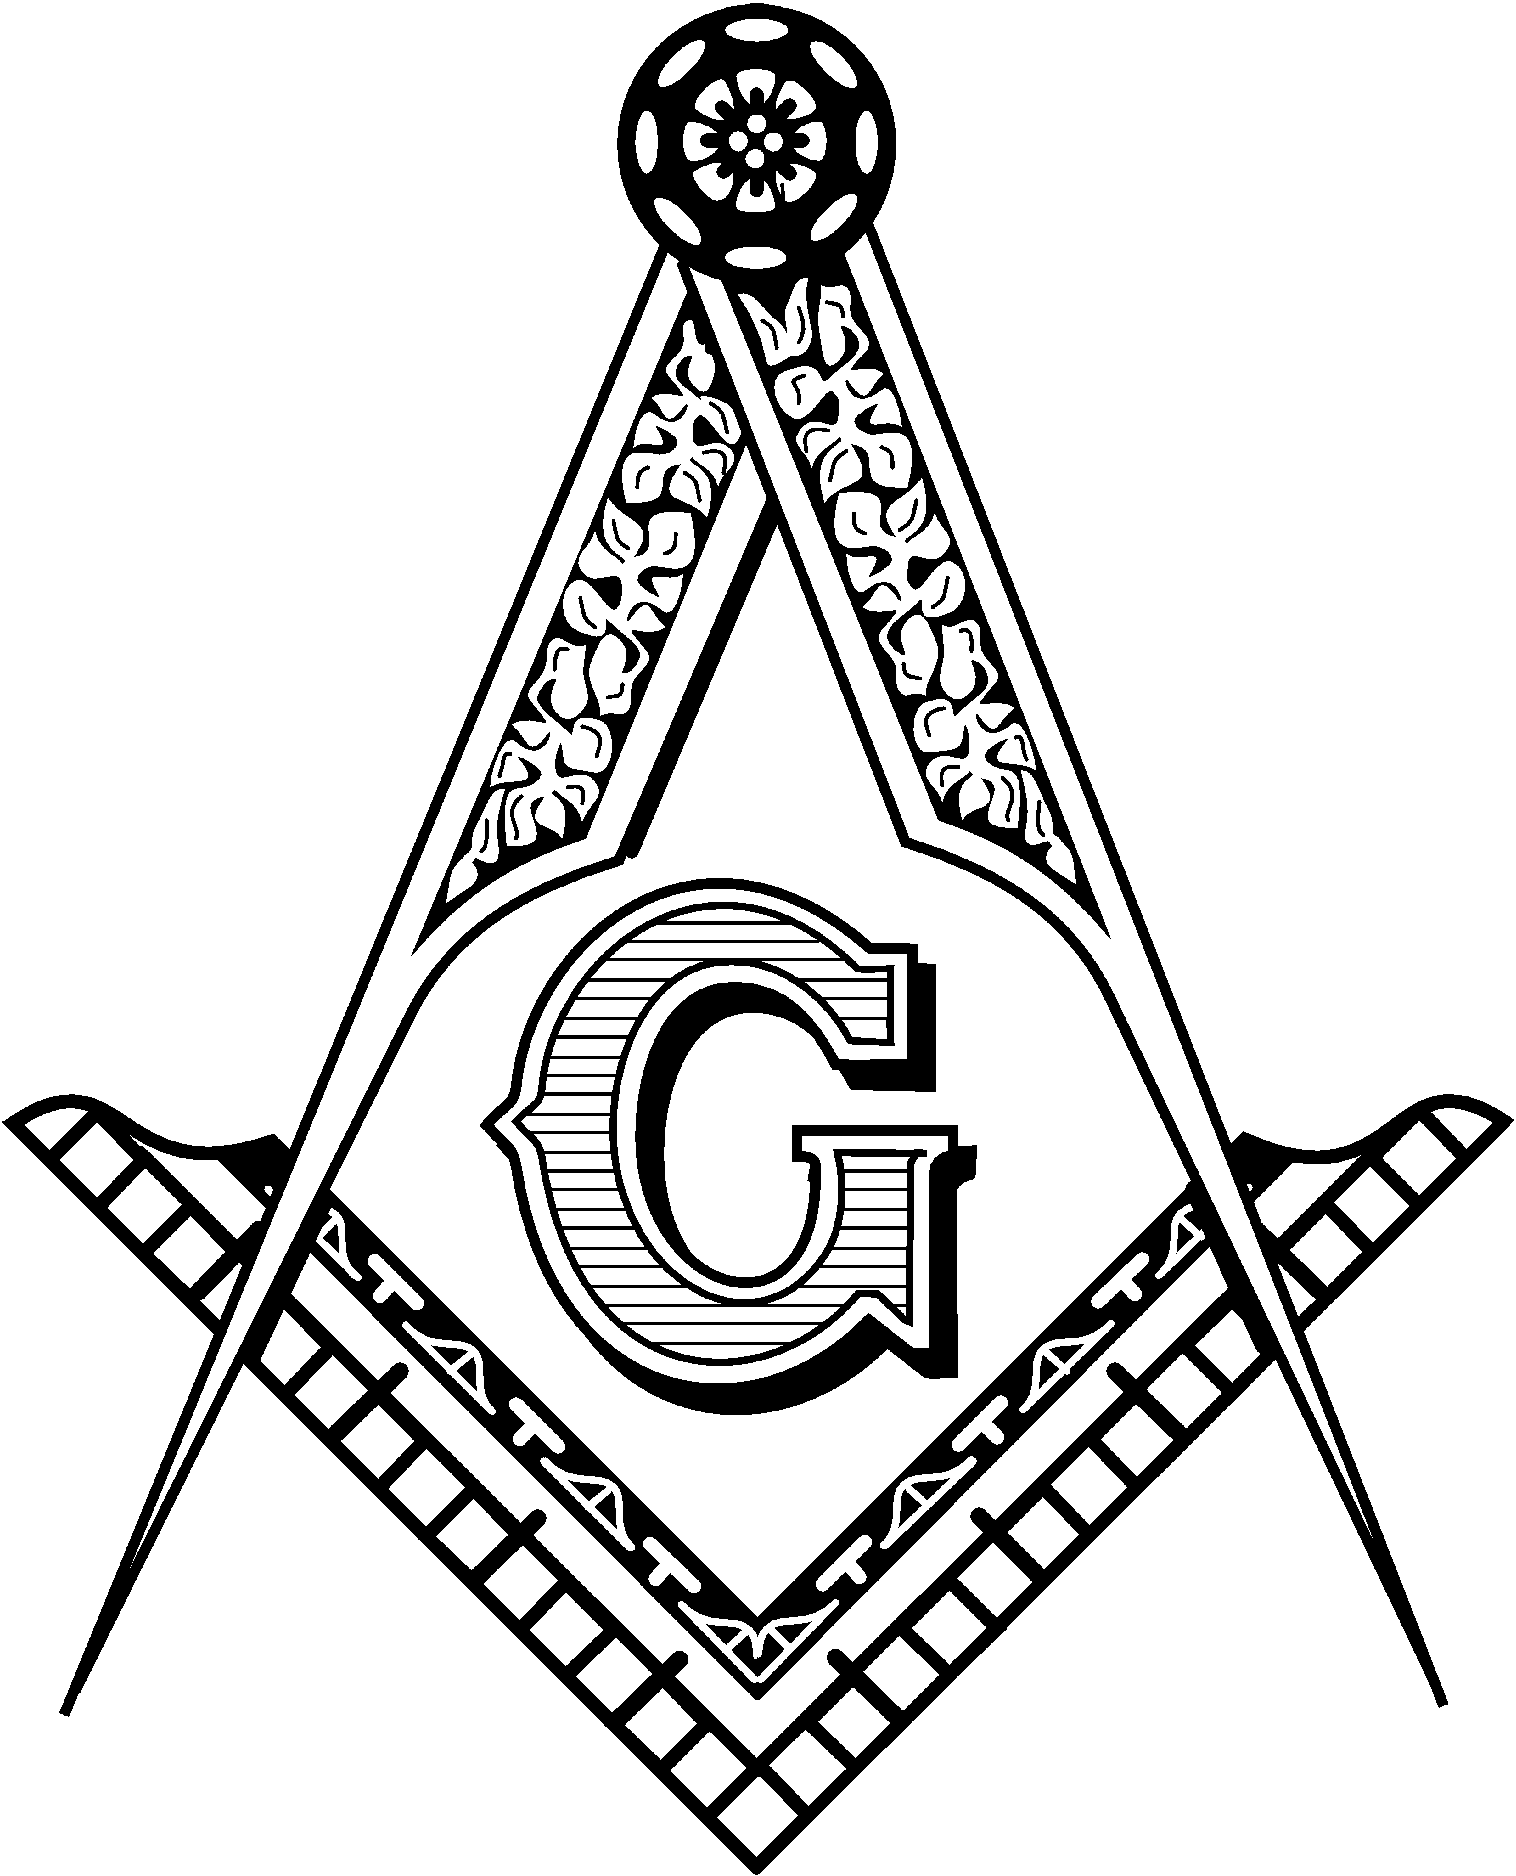 Masonic Clipart Compass And Square - Free Clipart ...